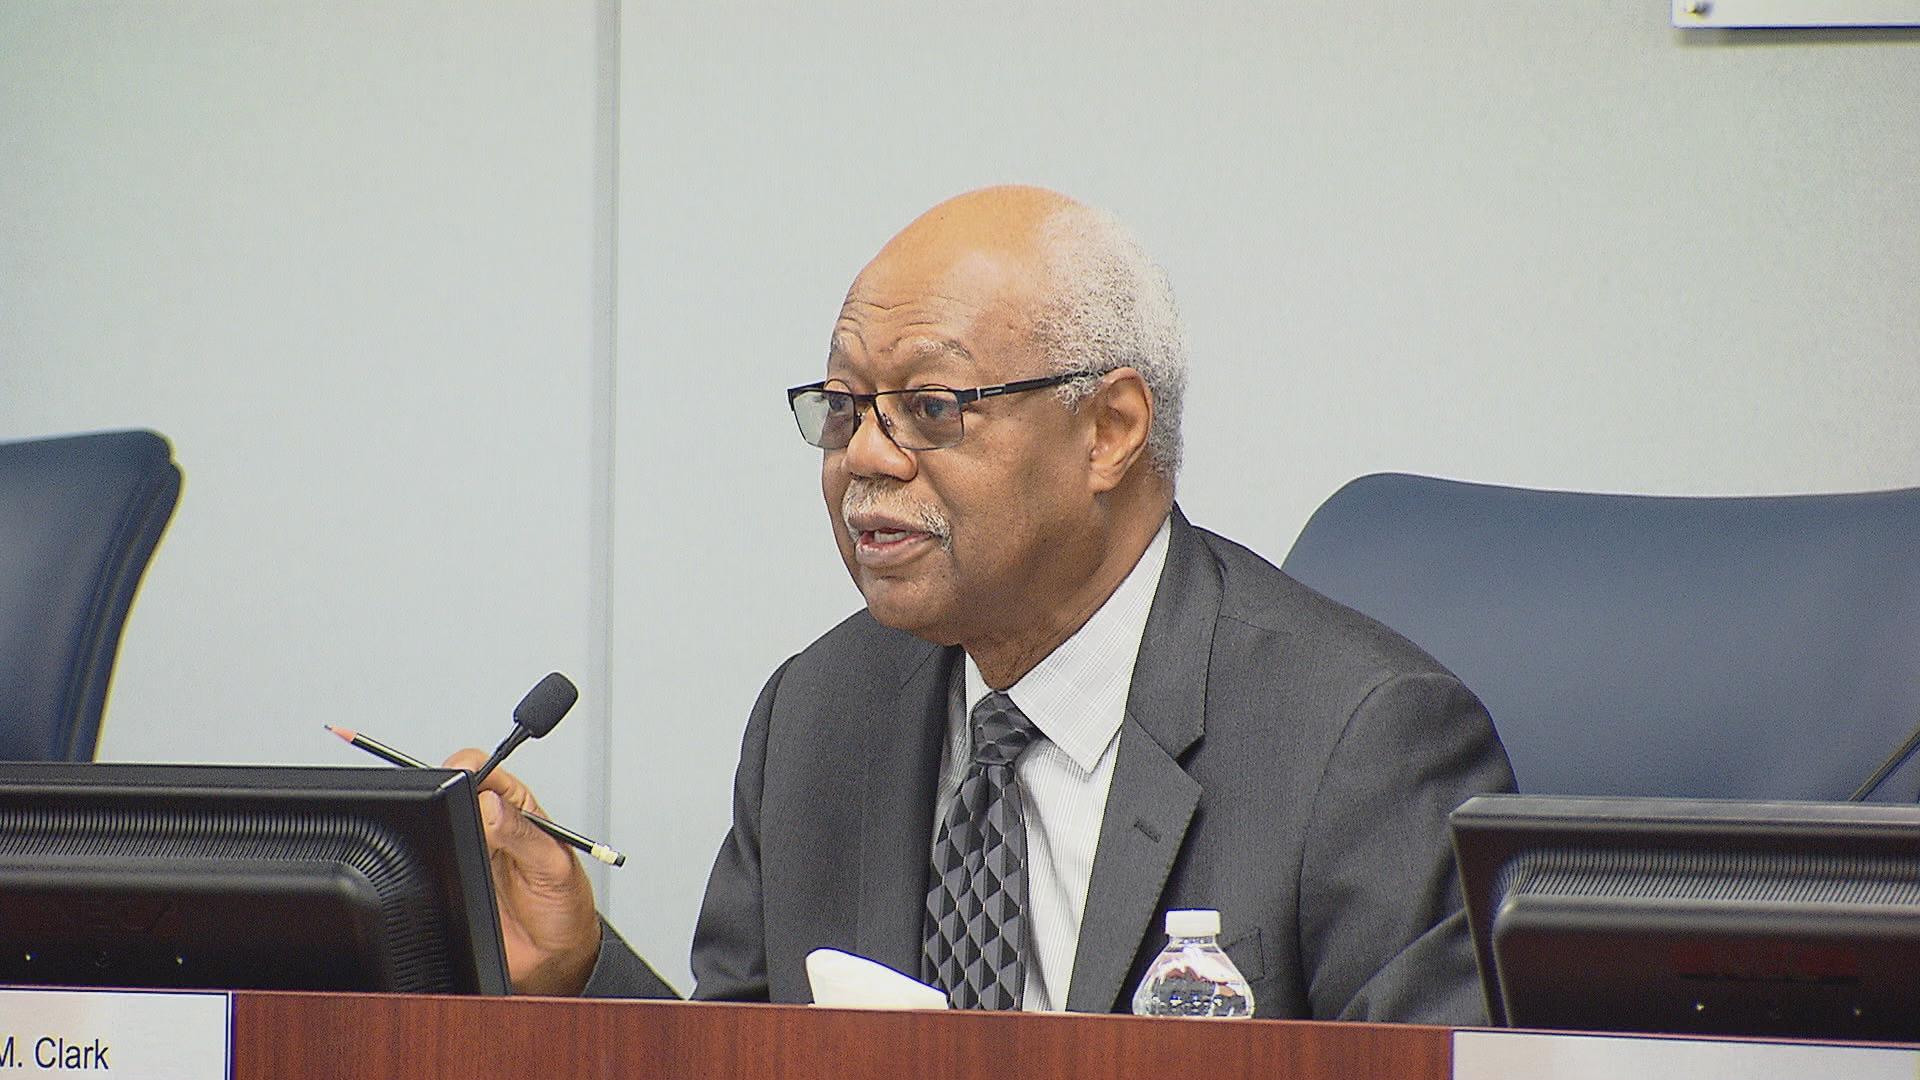 Board of Education President Frank Clark and CPS officials held a pair of public hearings Monday to discuss the district’s revised budget for the 2017 fiscal year. (Chicago Tonight)